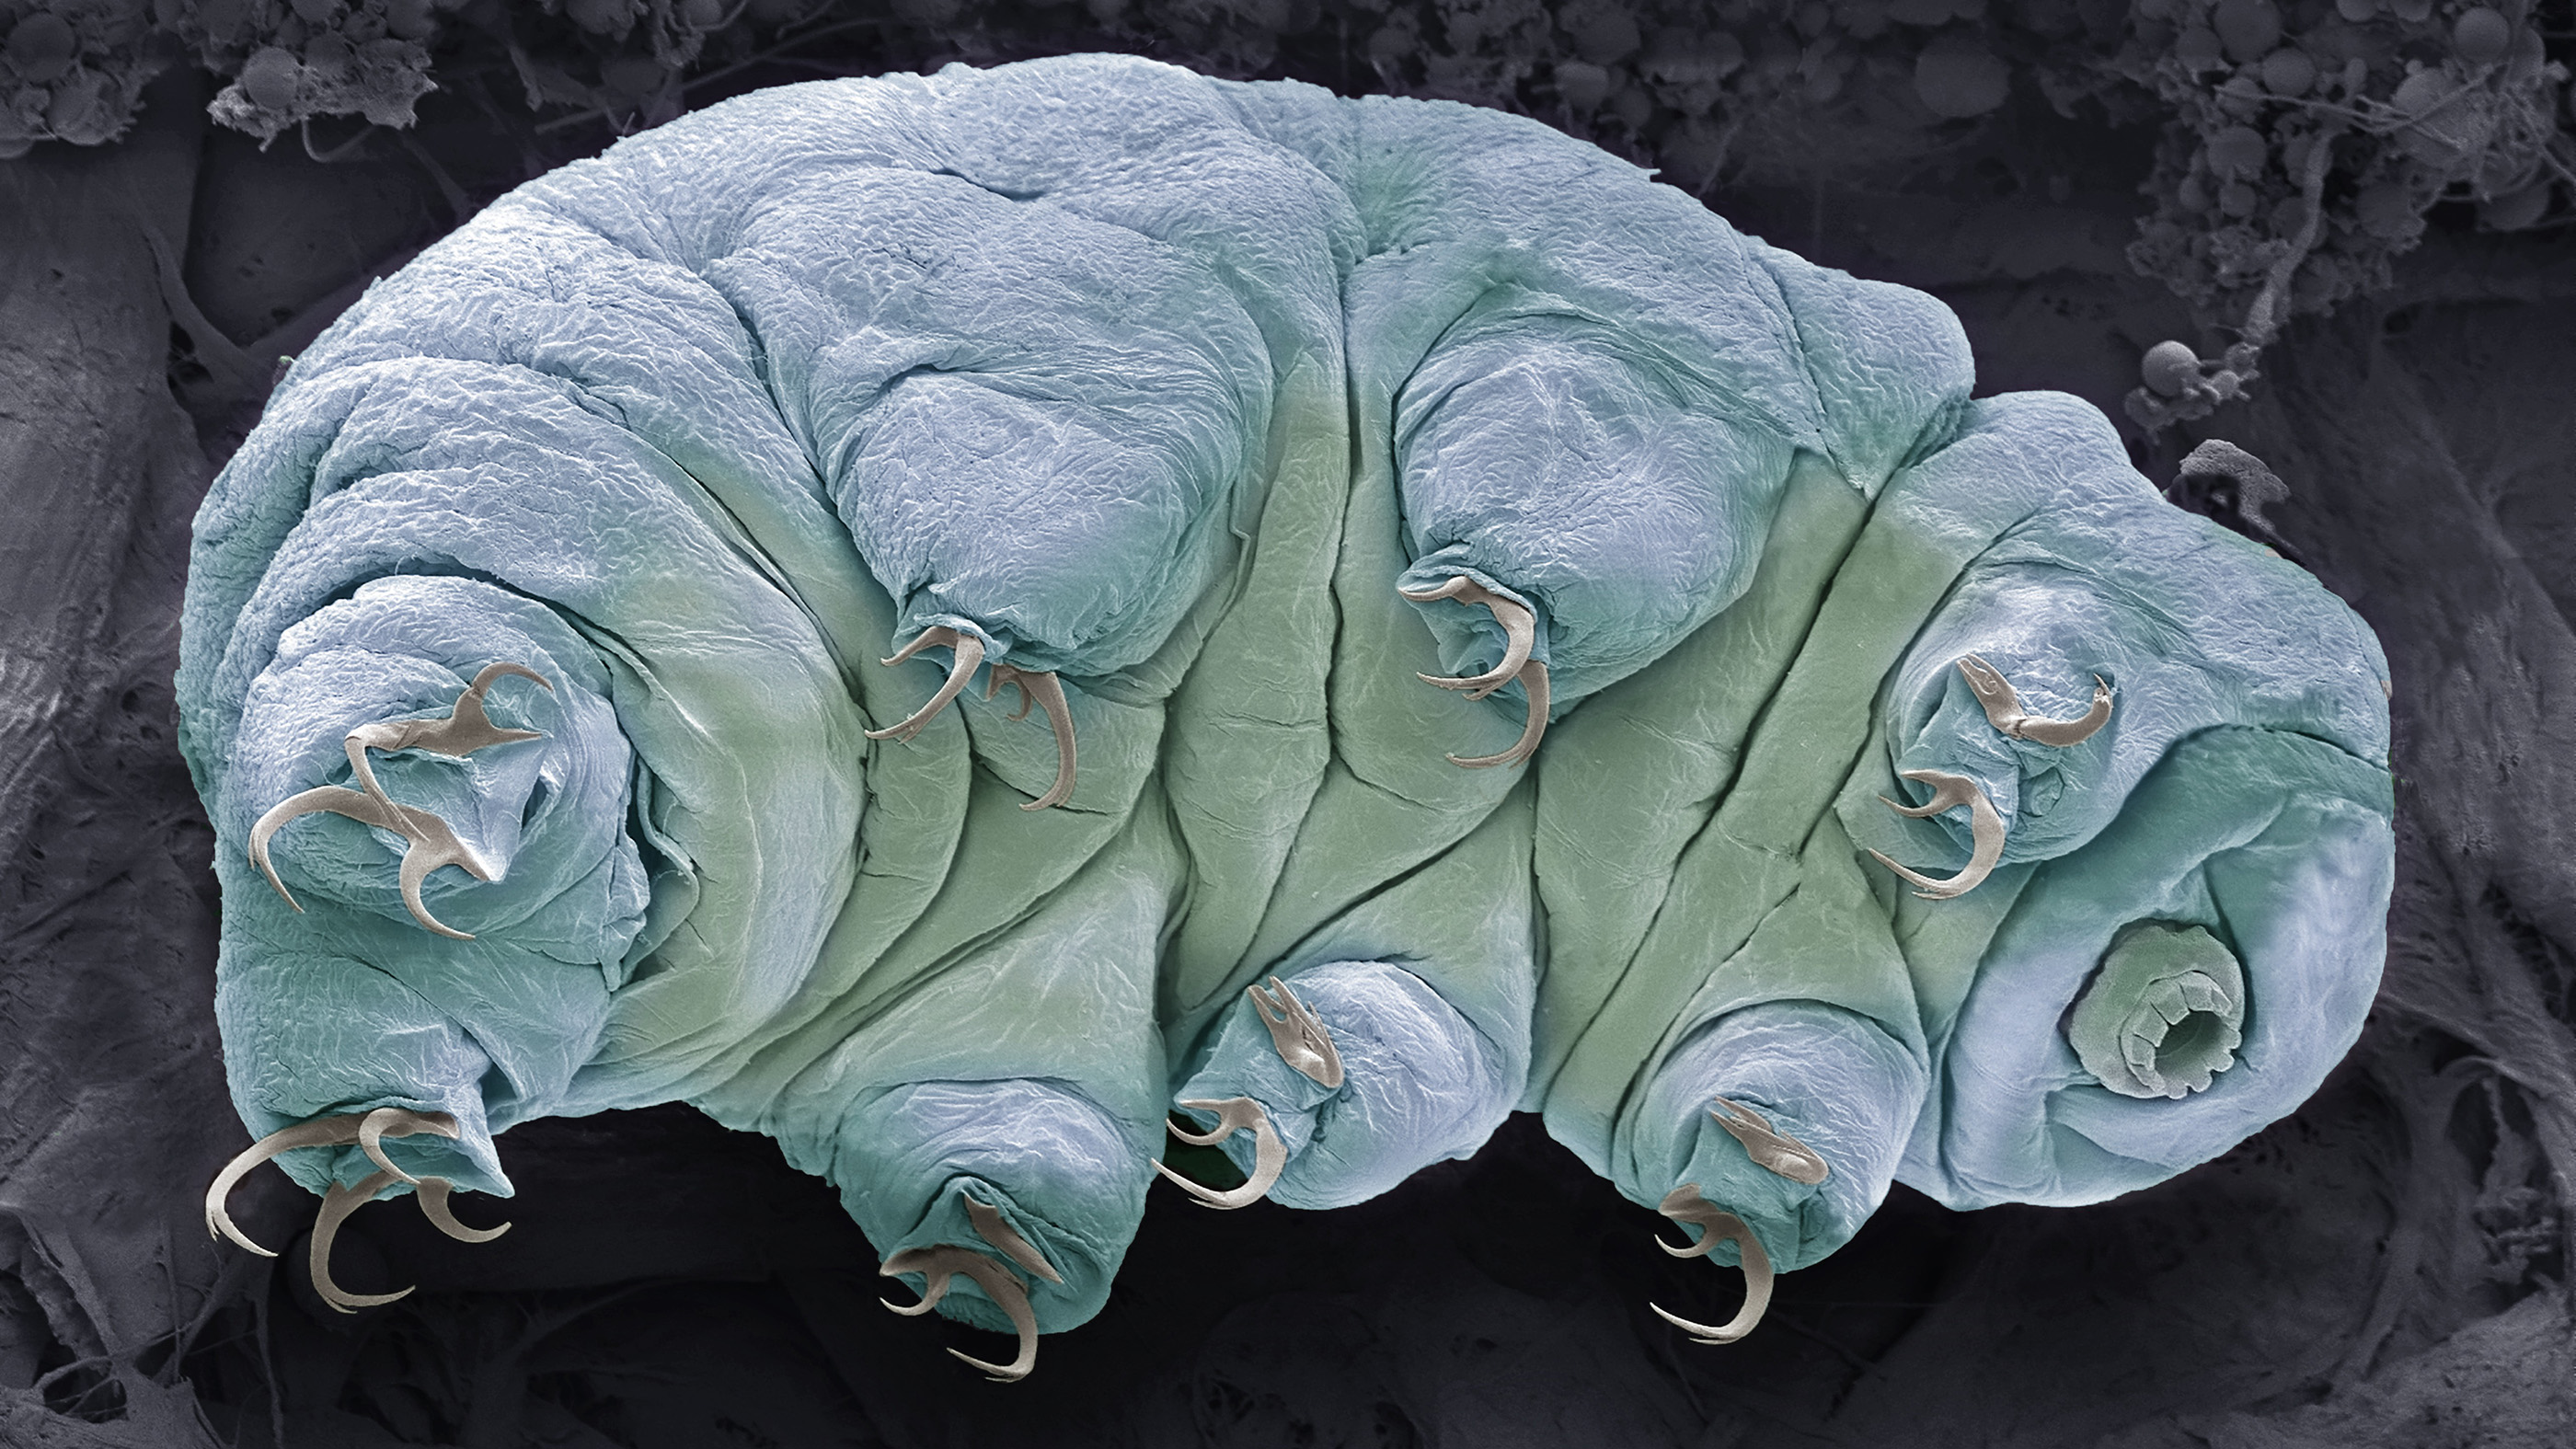 Frozen tardigrade becomes first 'quantum entangled' animal in history, researchers claim thumbnail